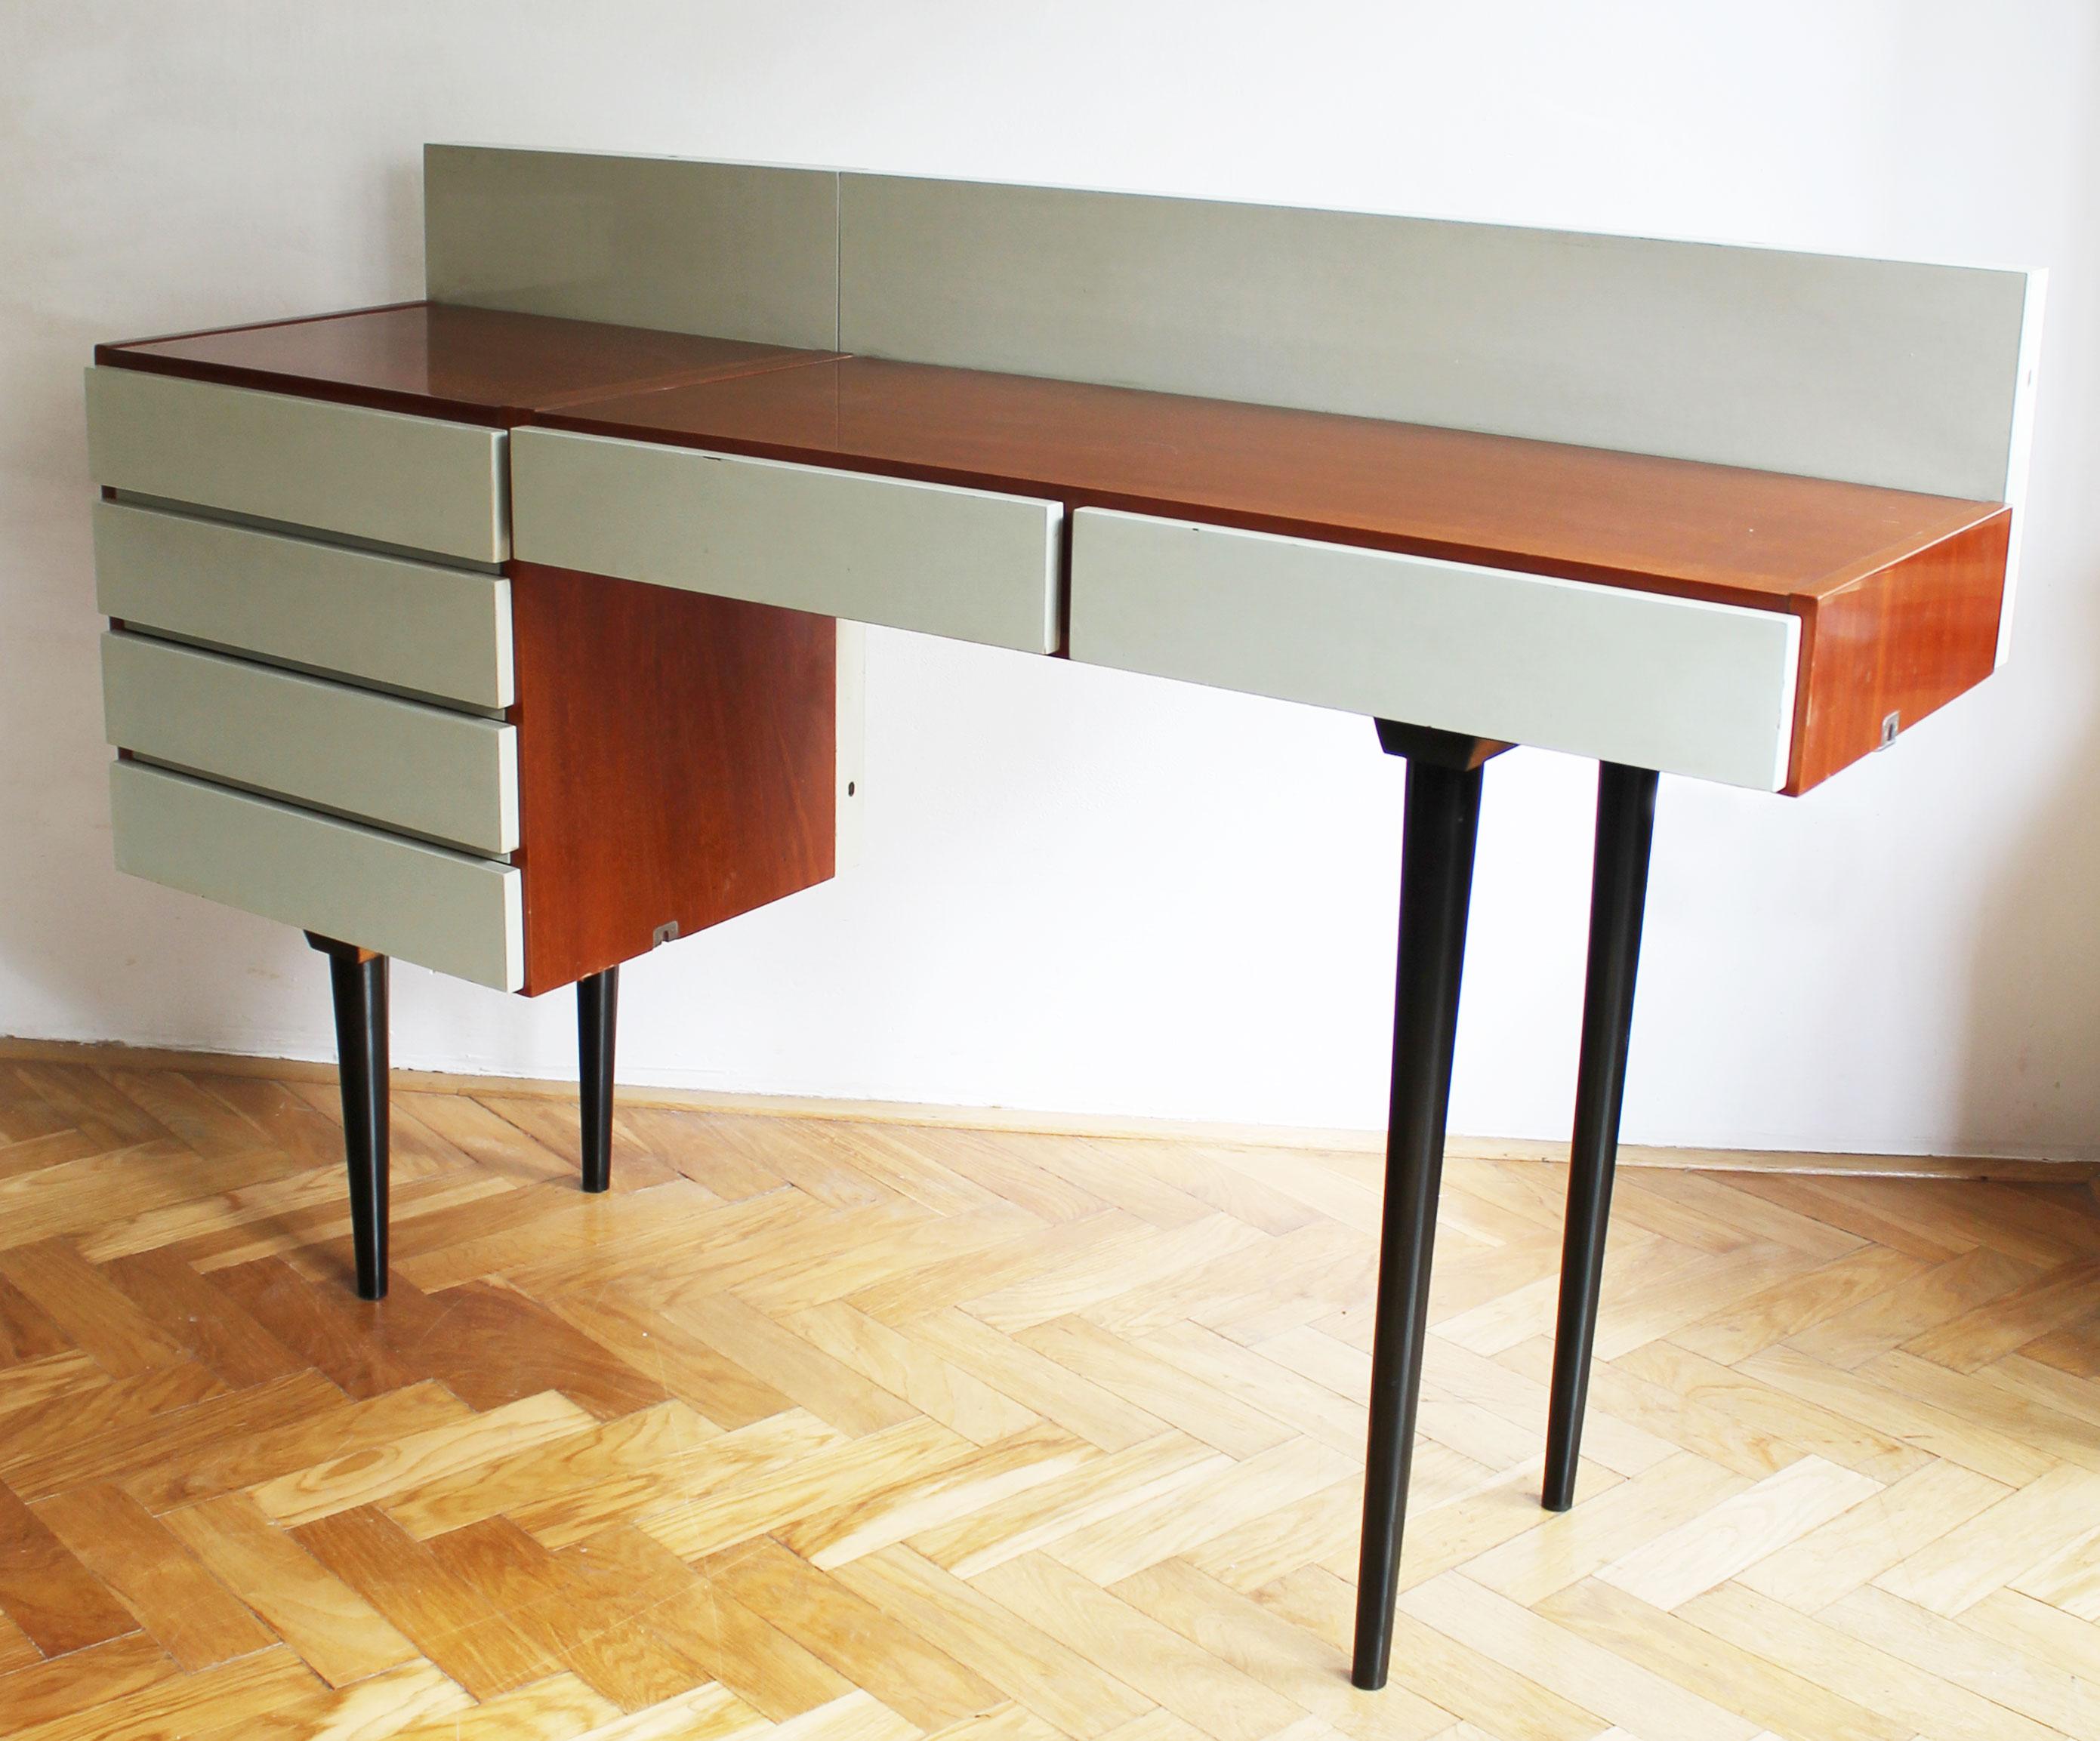 This desk was part of a modular living room set and was designed in collaboration by architects Frantisek Mezulanik with Mojmir Pozar. The set was produced by UP Zavody in their factory in Bucovice near Brno.

This desk was designed in the 1970s and